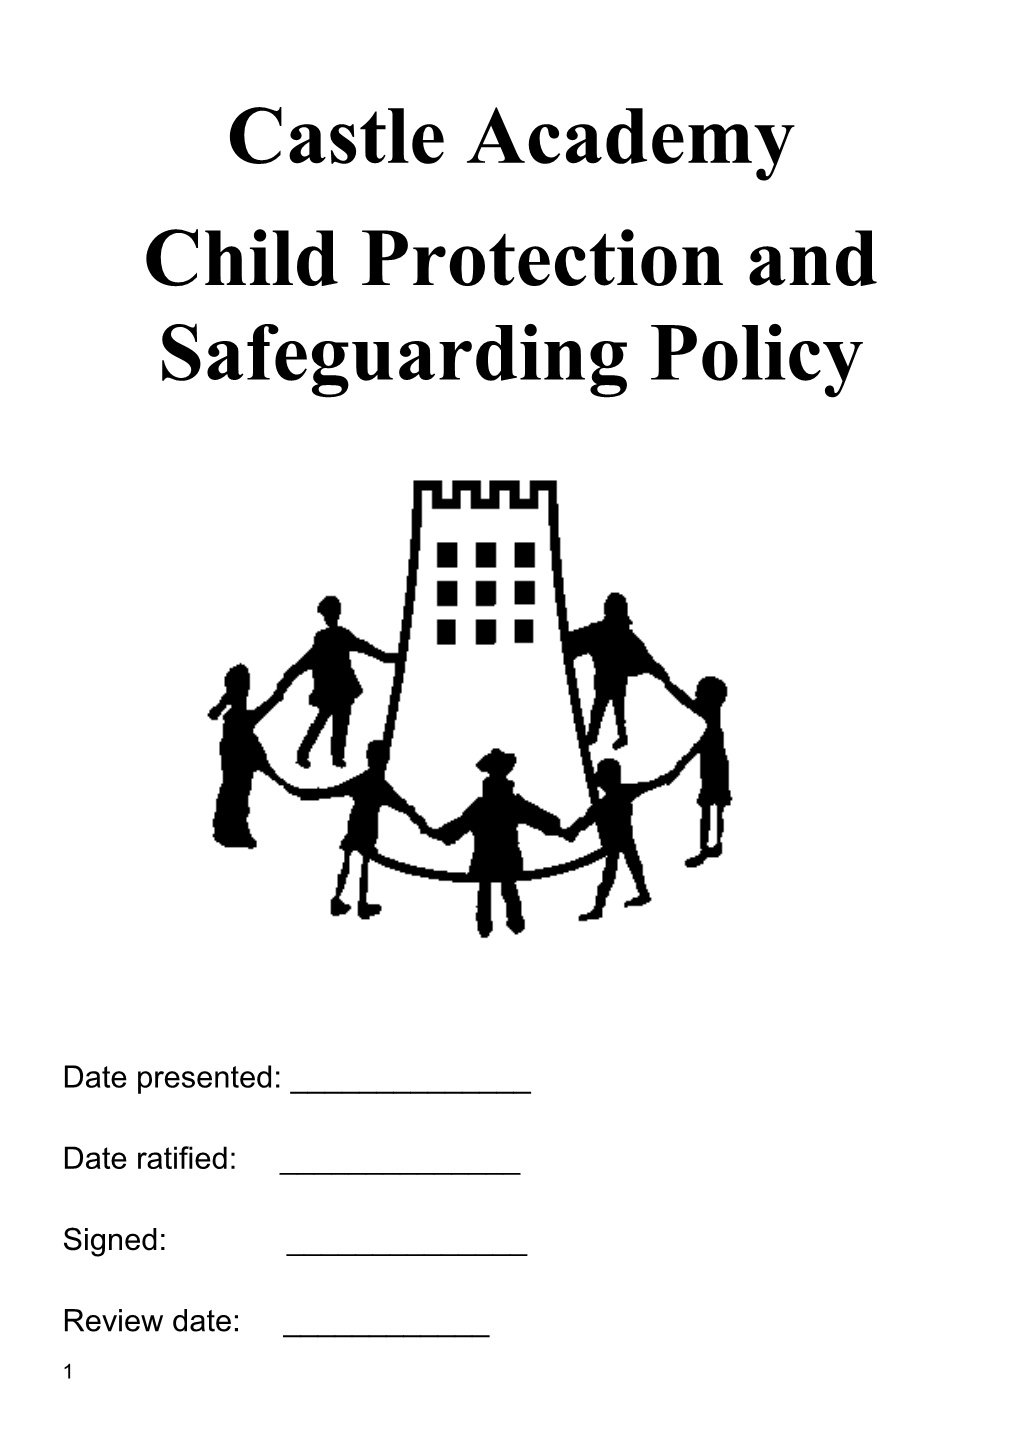 Child Protection and Safeguarding Policy s3